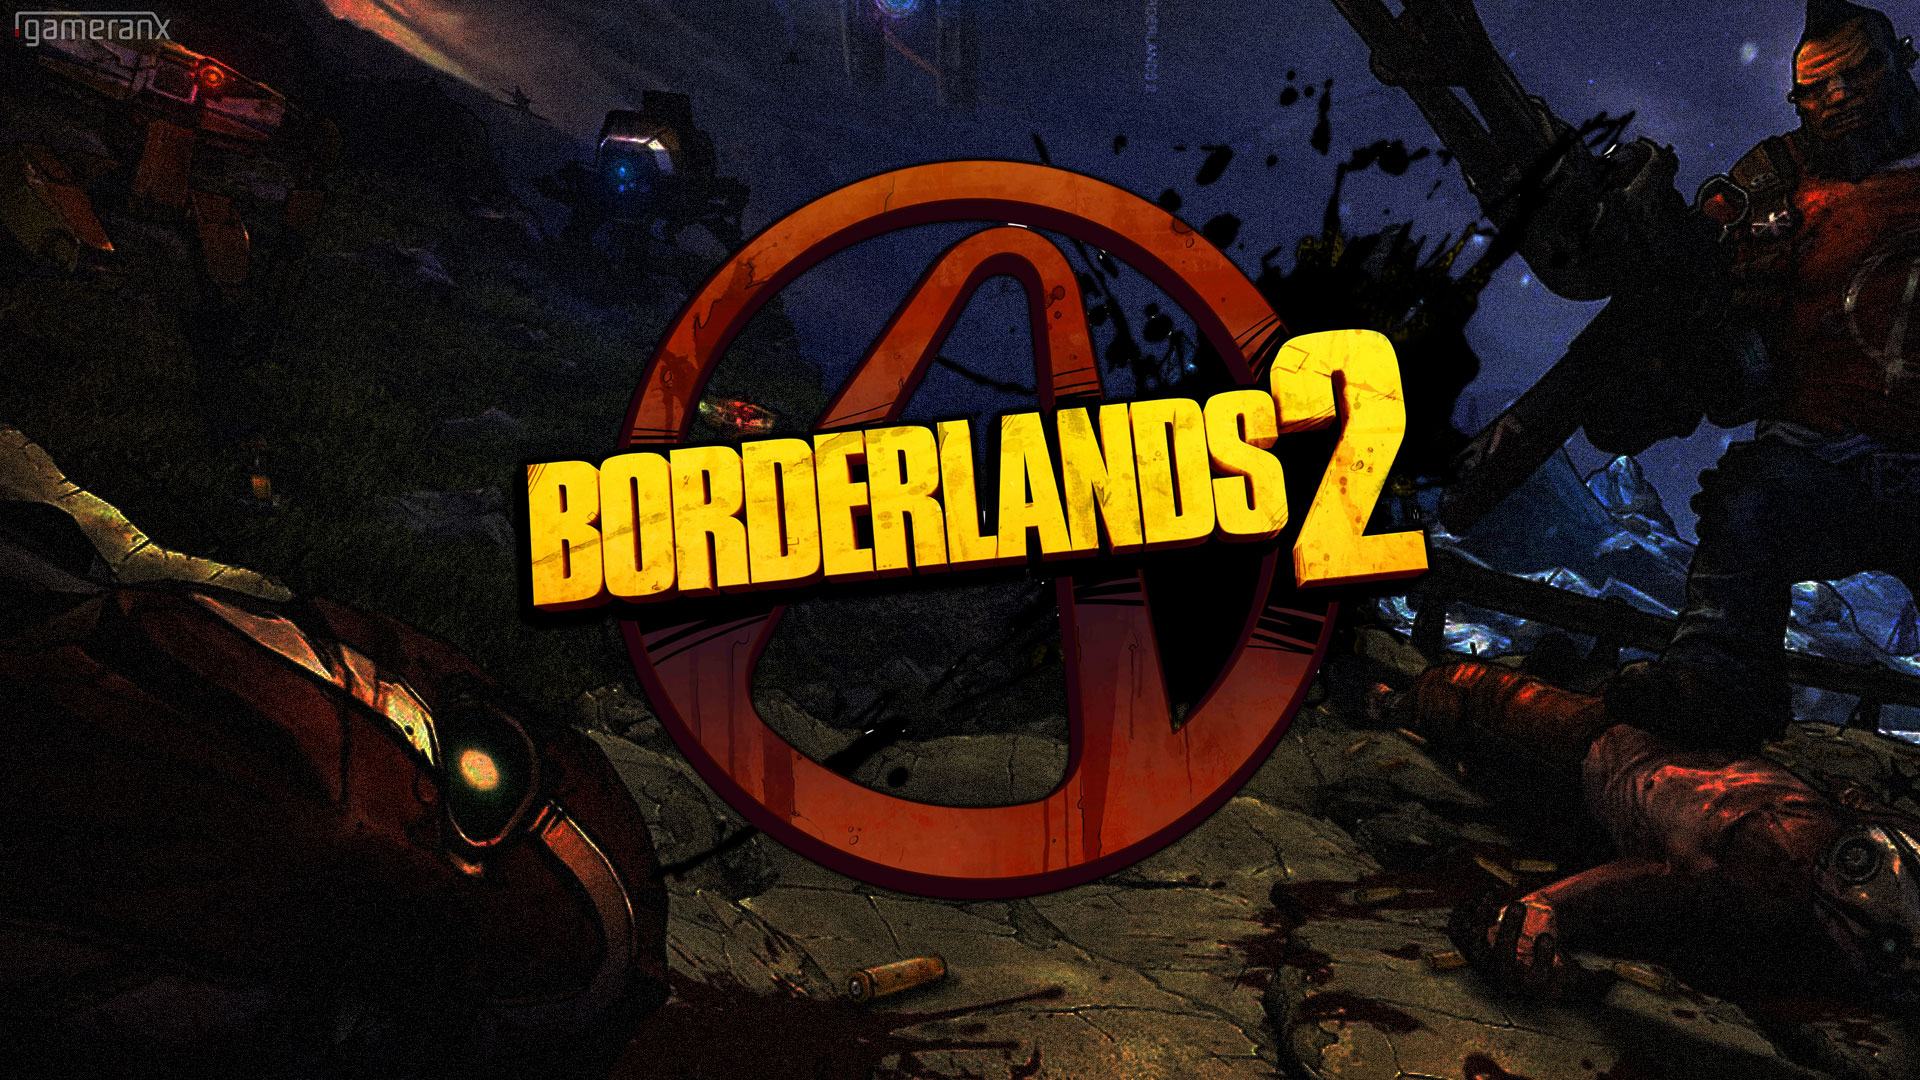 Borderlands 2 Introduces A New Playable Character